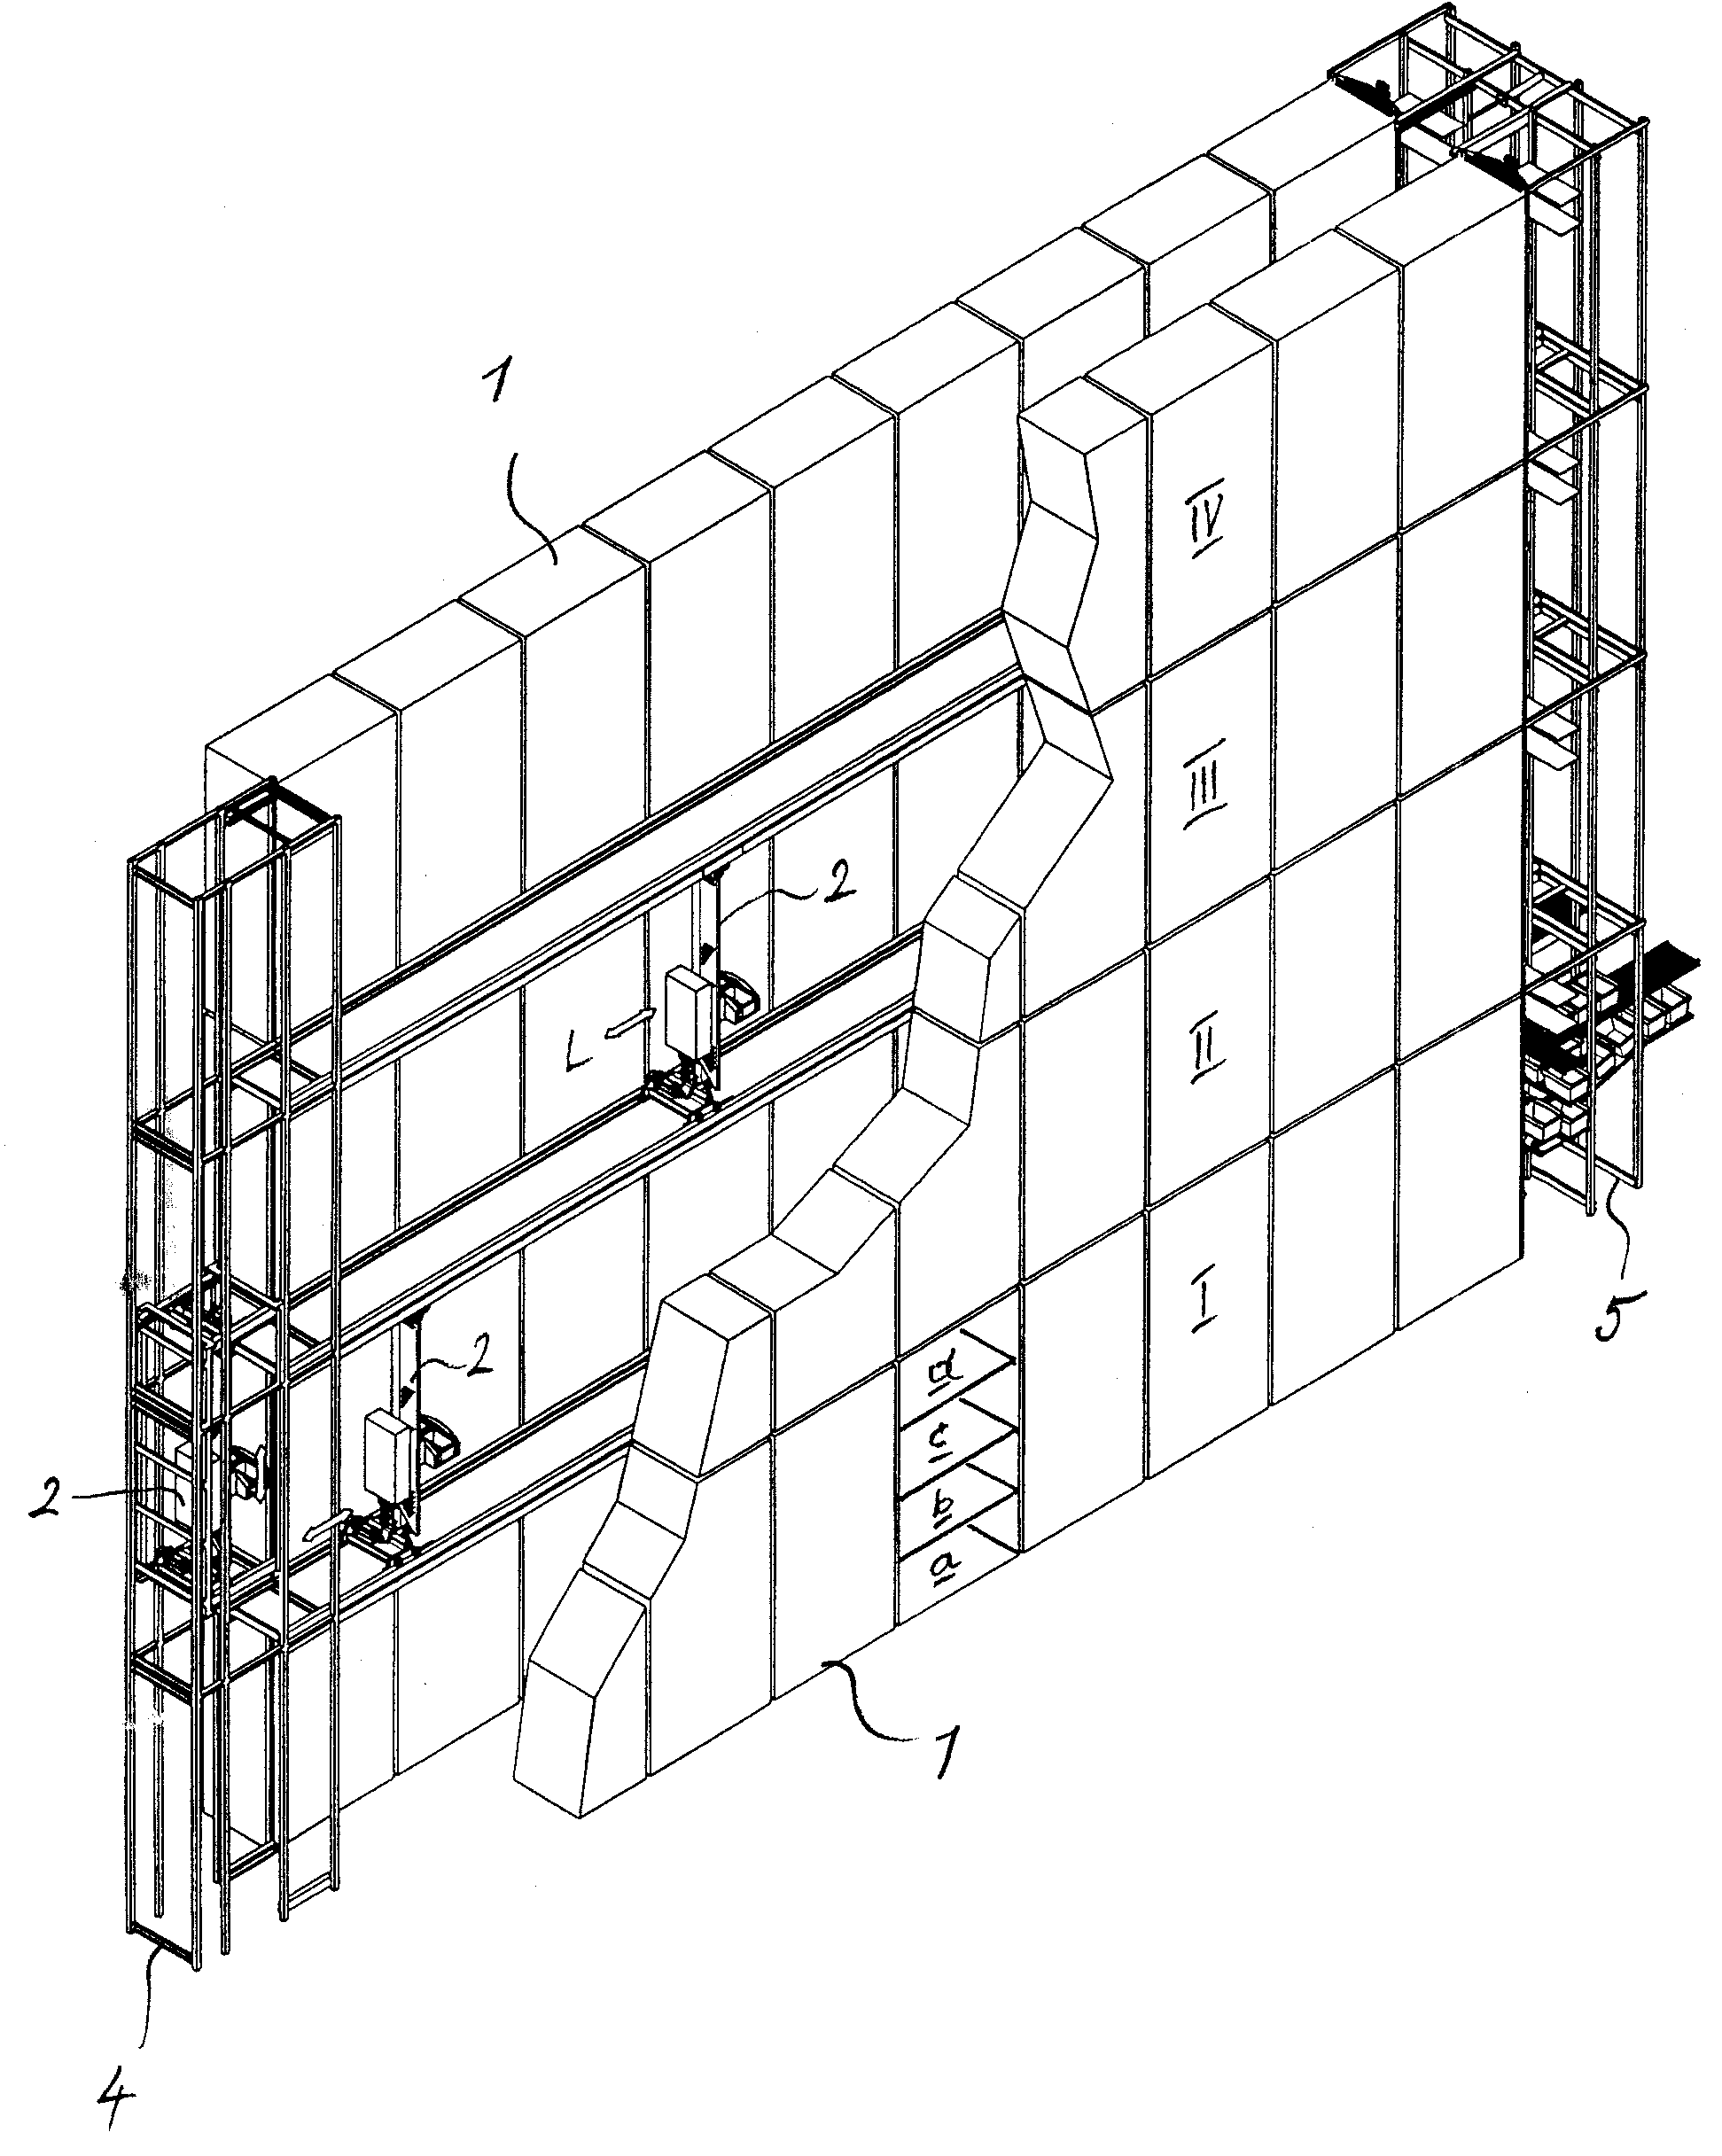 Method and System for Operating a Shelf in a Commissioning System